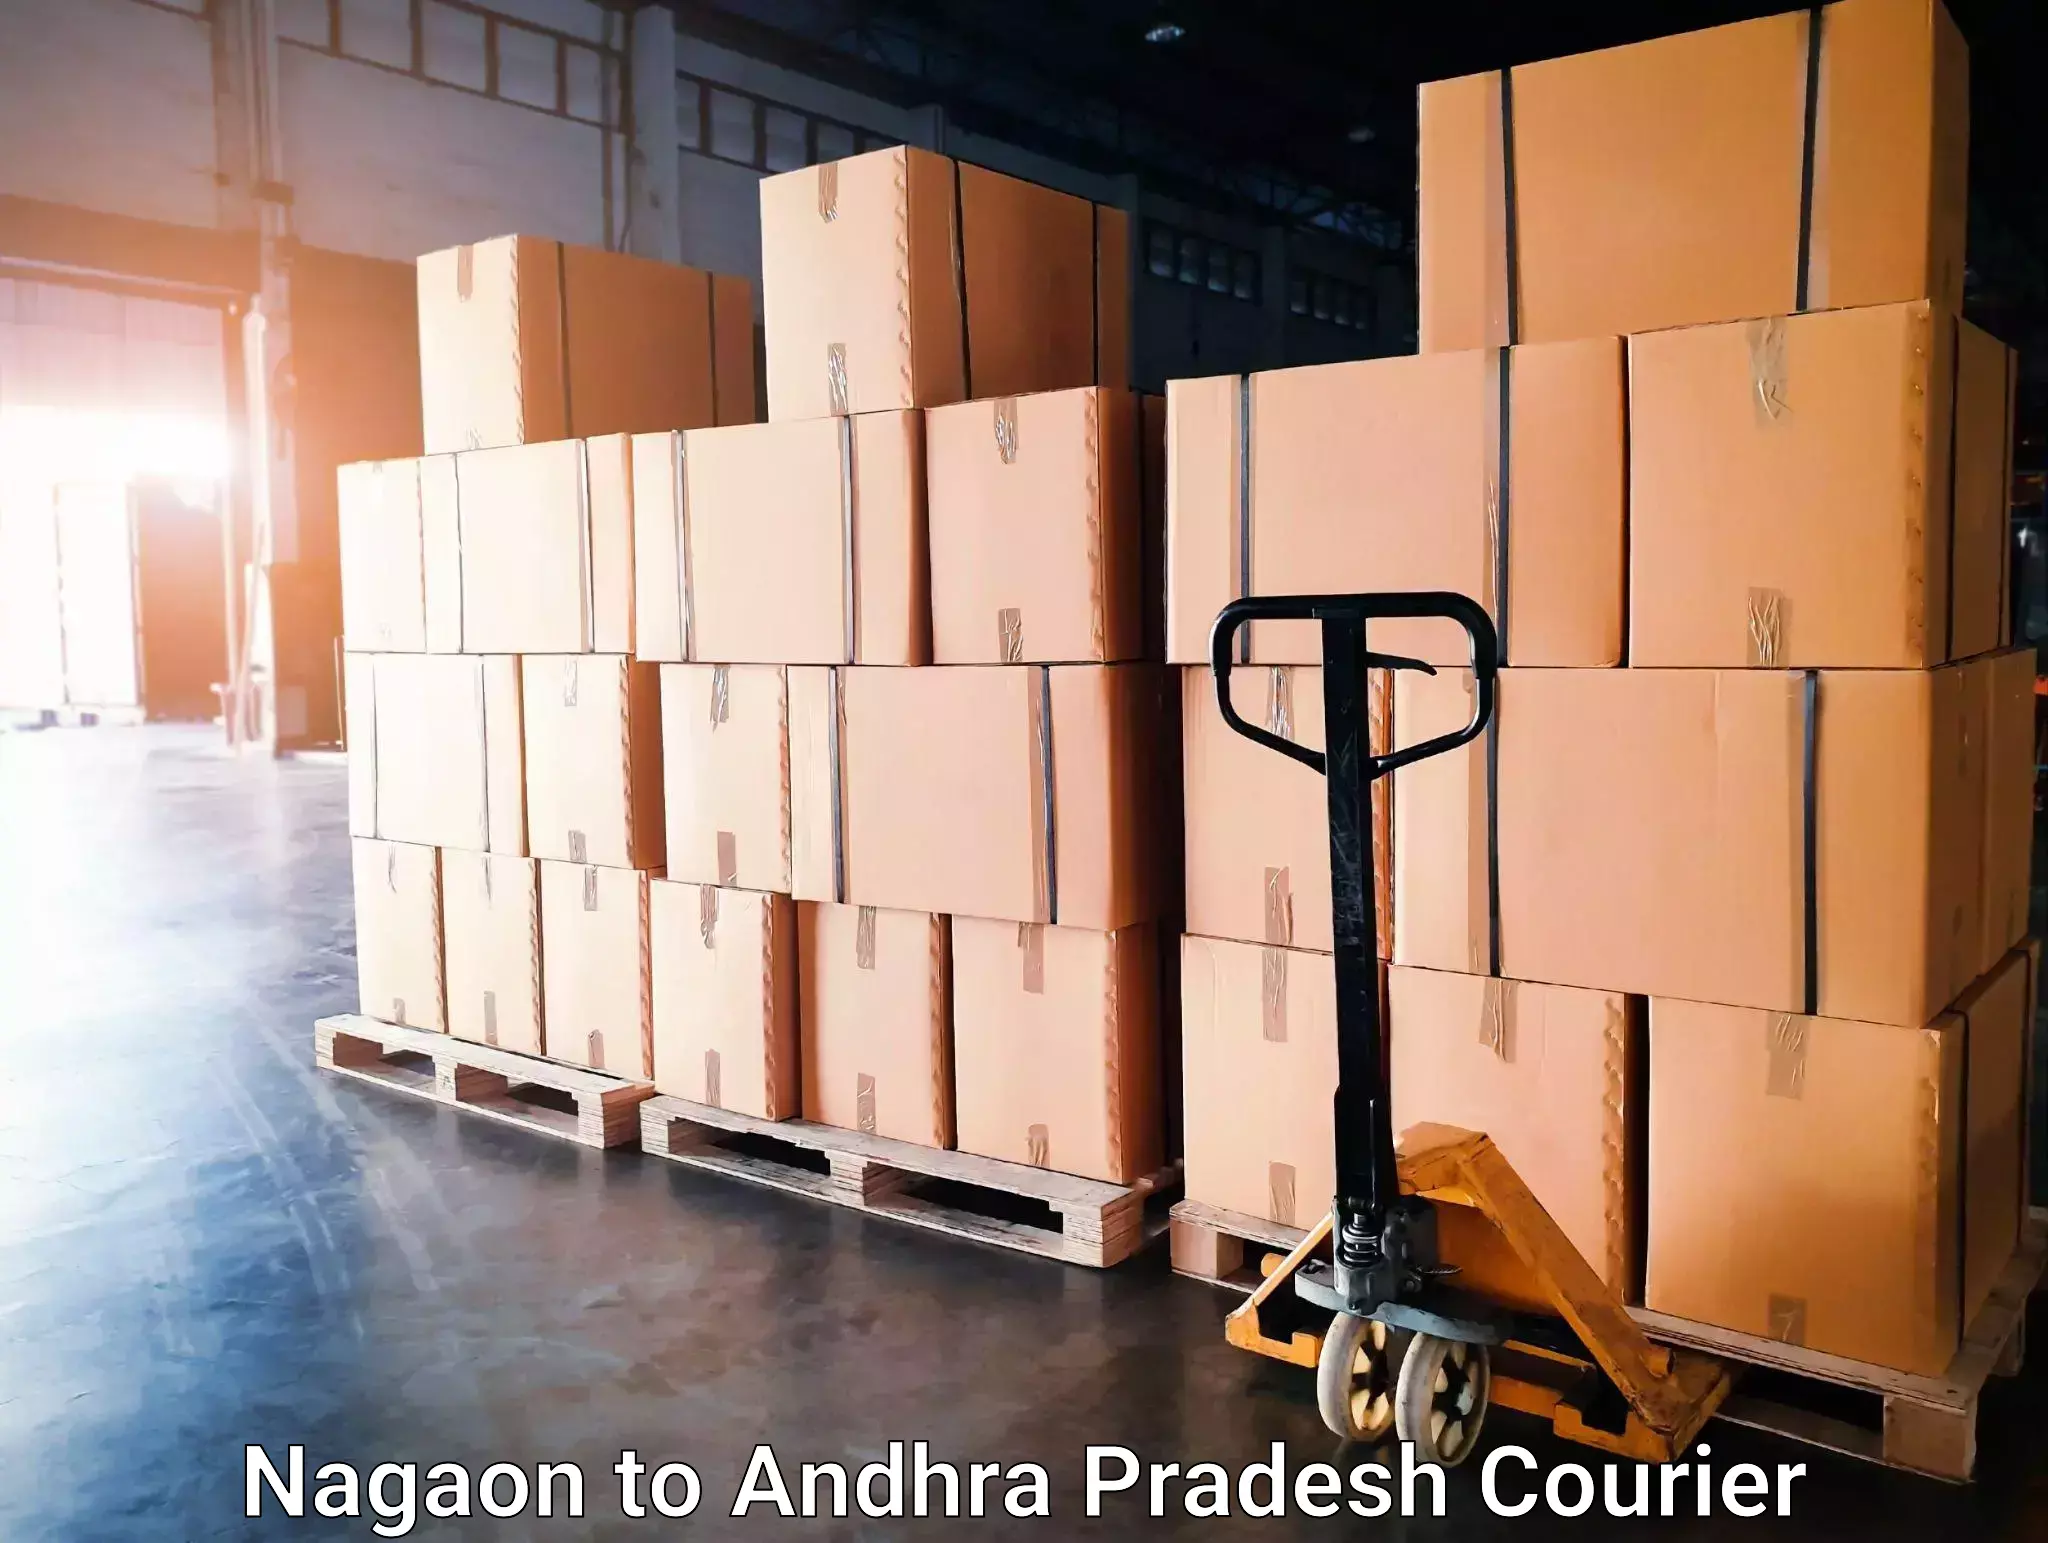 24-hour courier services in Nagaon to Visakhapatnam Port